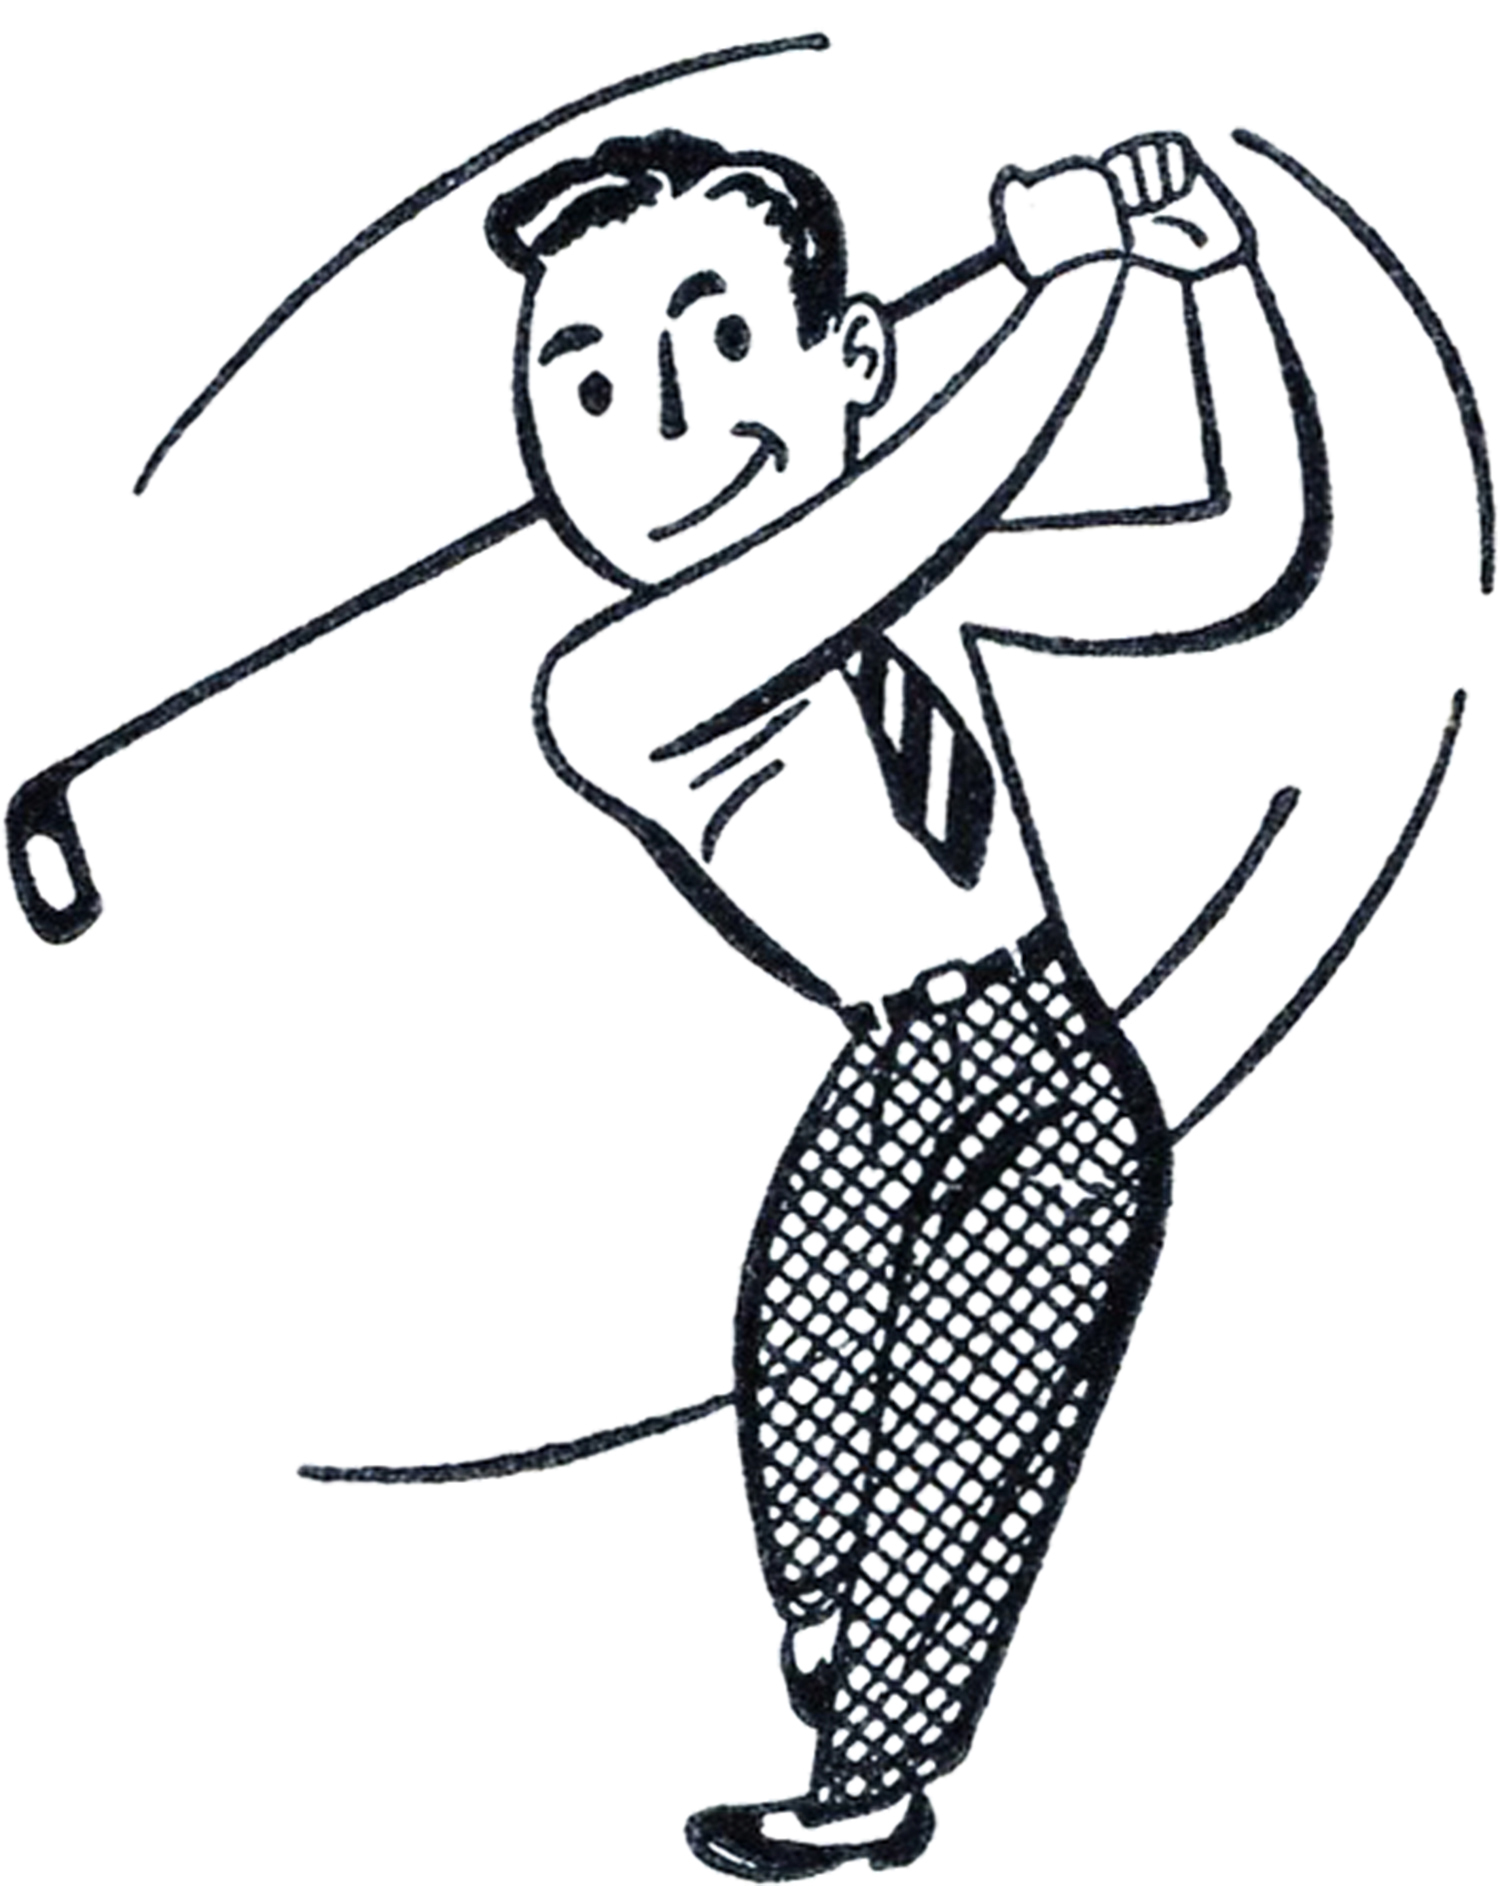 Golfer golf clipart black and white free clipart images